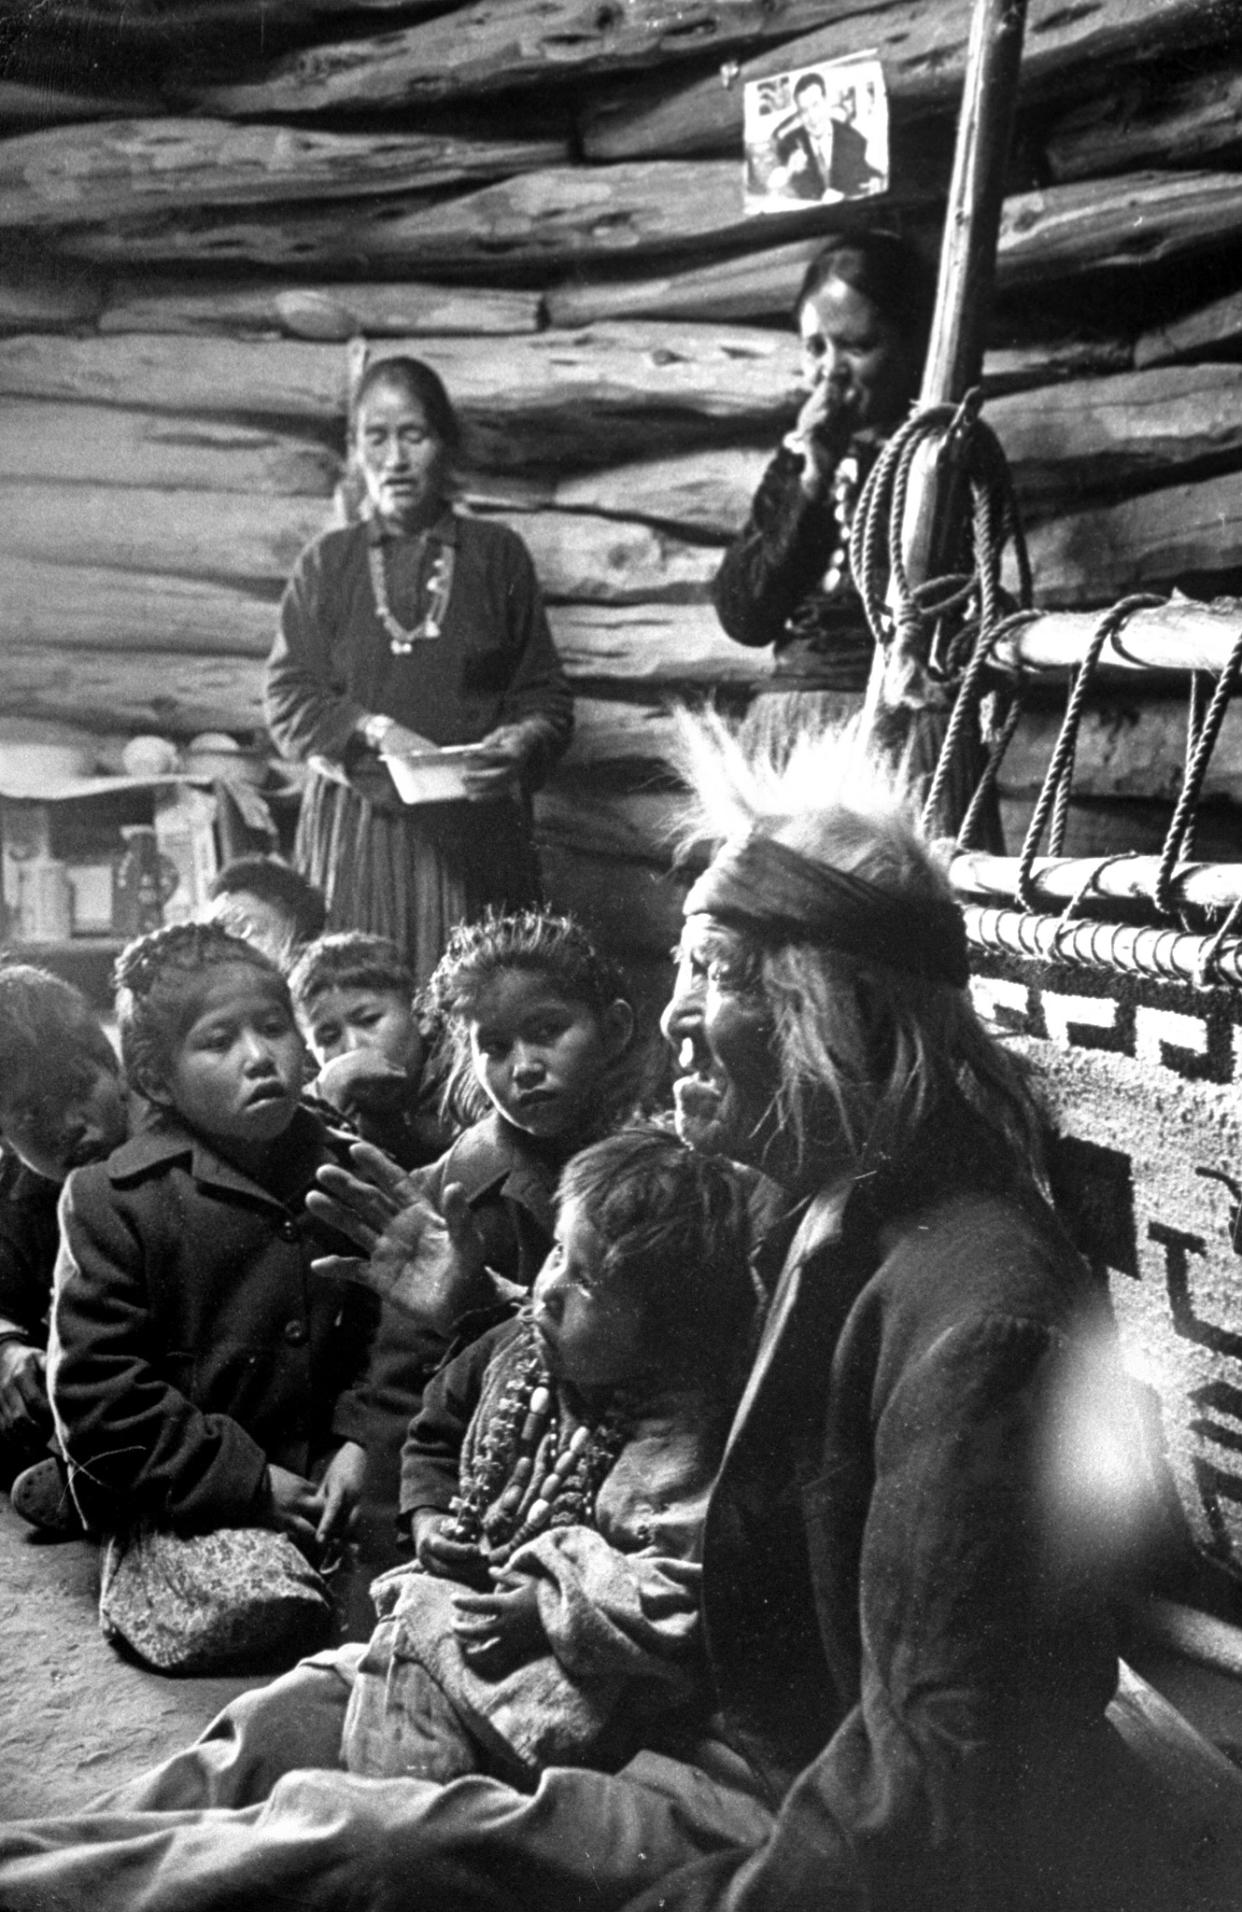 <b>Caption from LIFE.</b> Seated close to the evening fire, old man Gray Mountain, 91, tells his small grandchildren legends about the early days of the Navajo people.